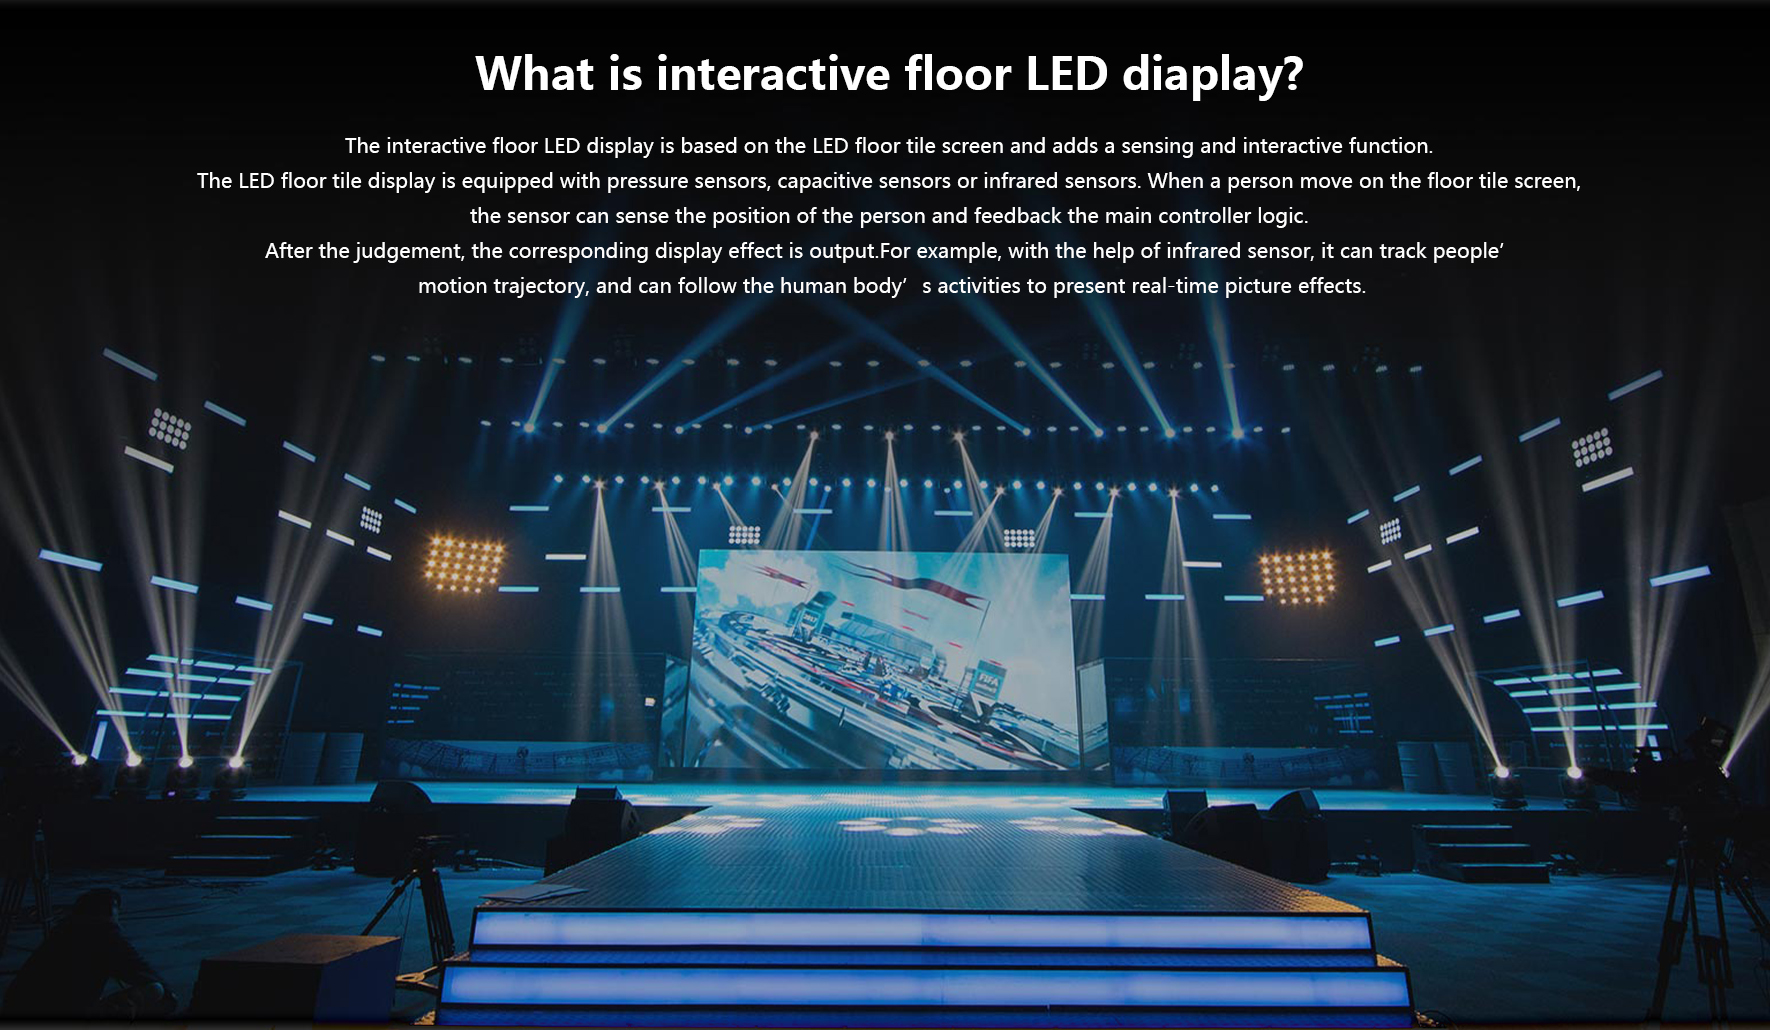 LED-grindys-display-imagesfeatur4